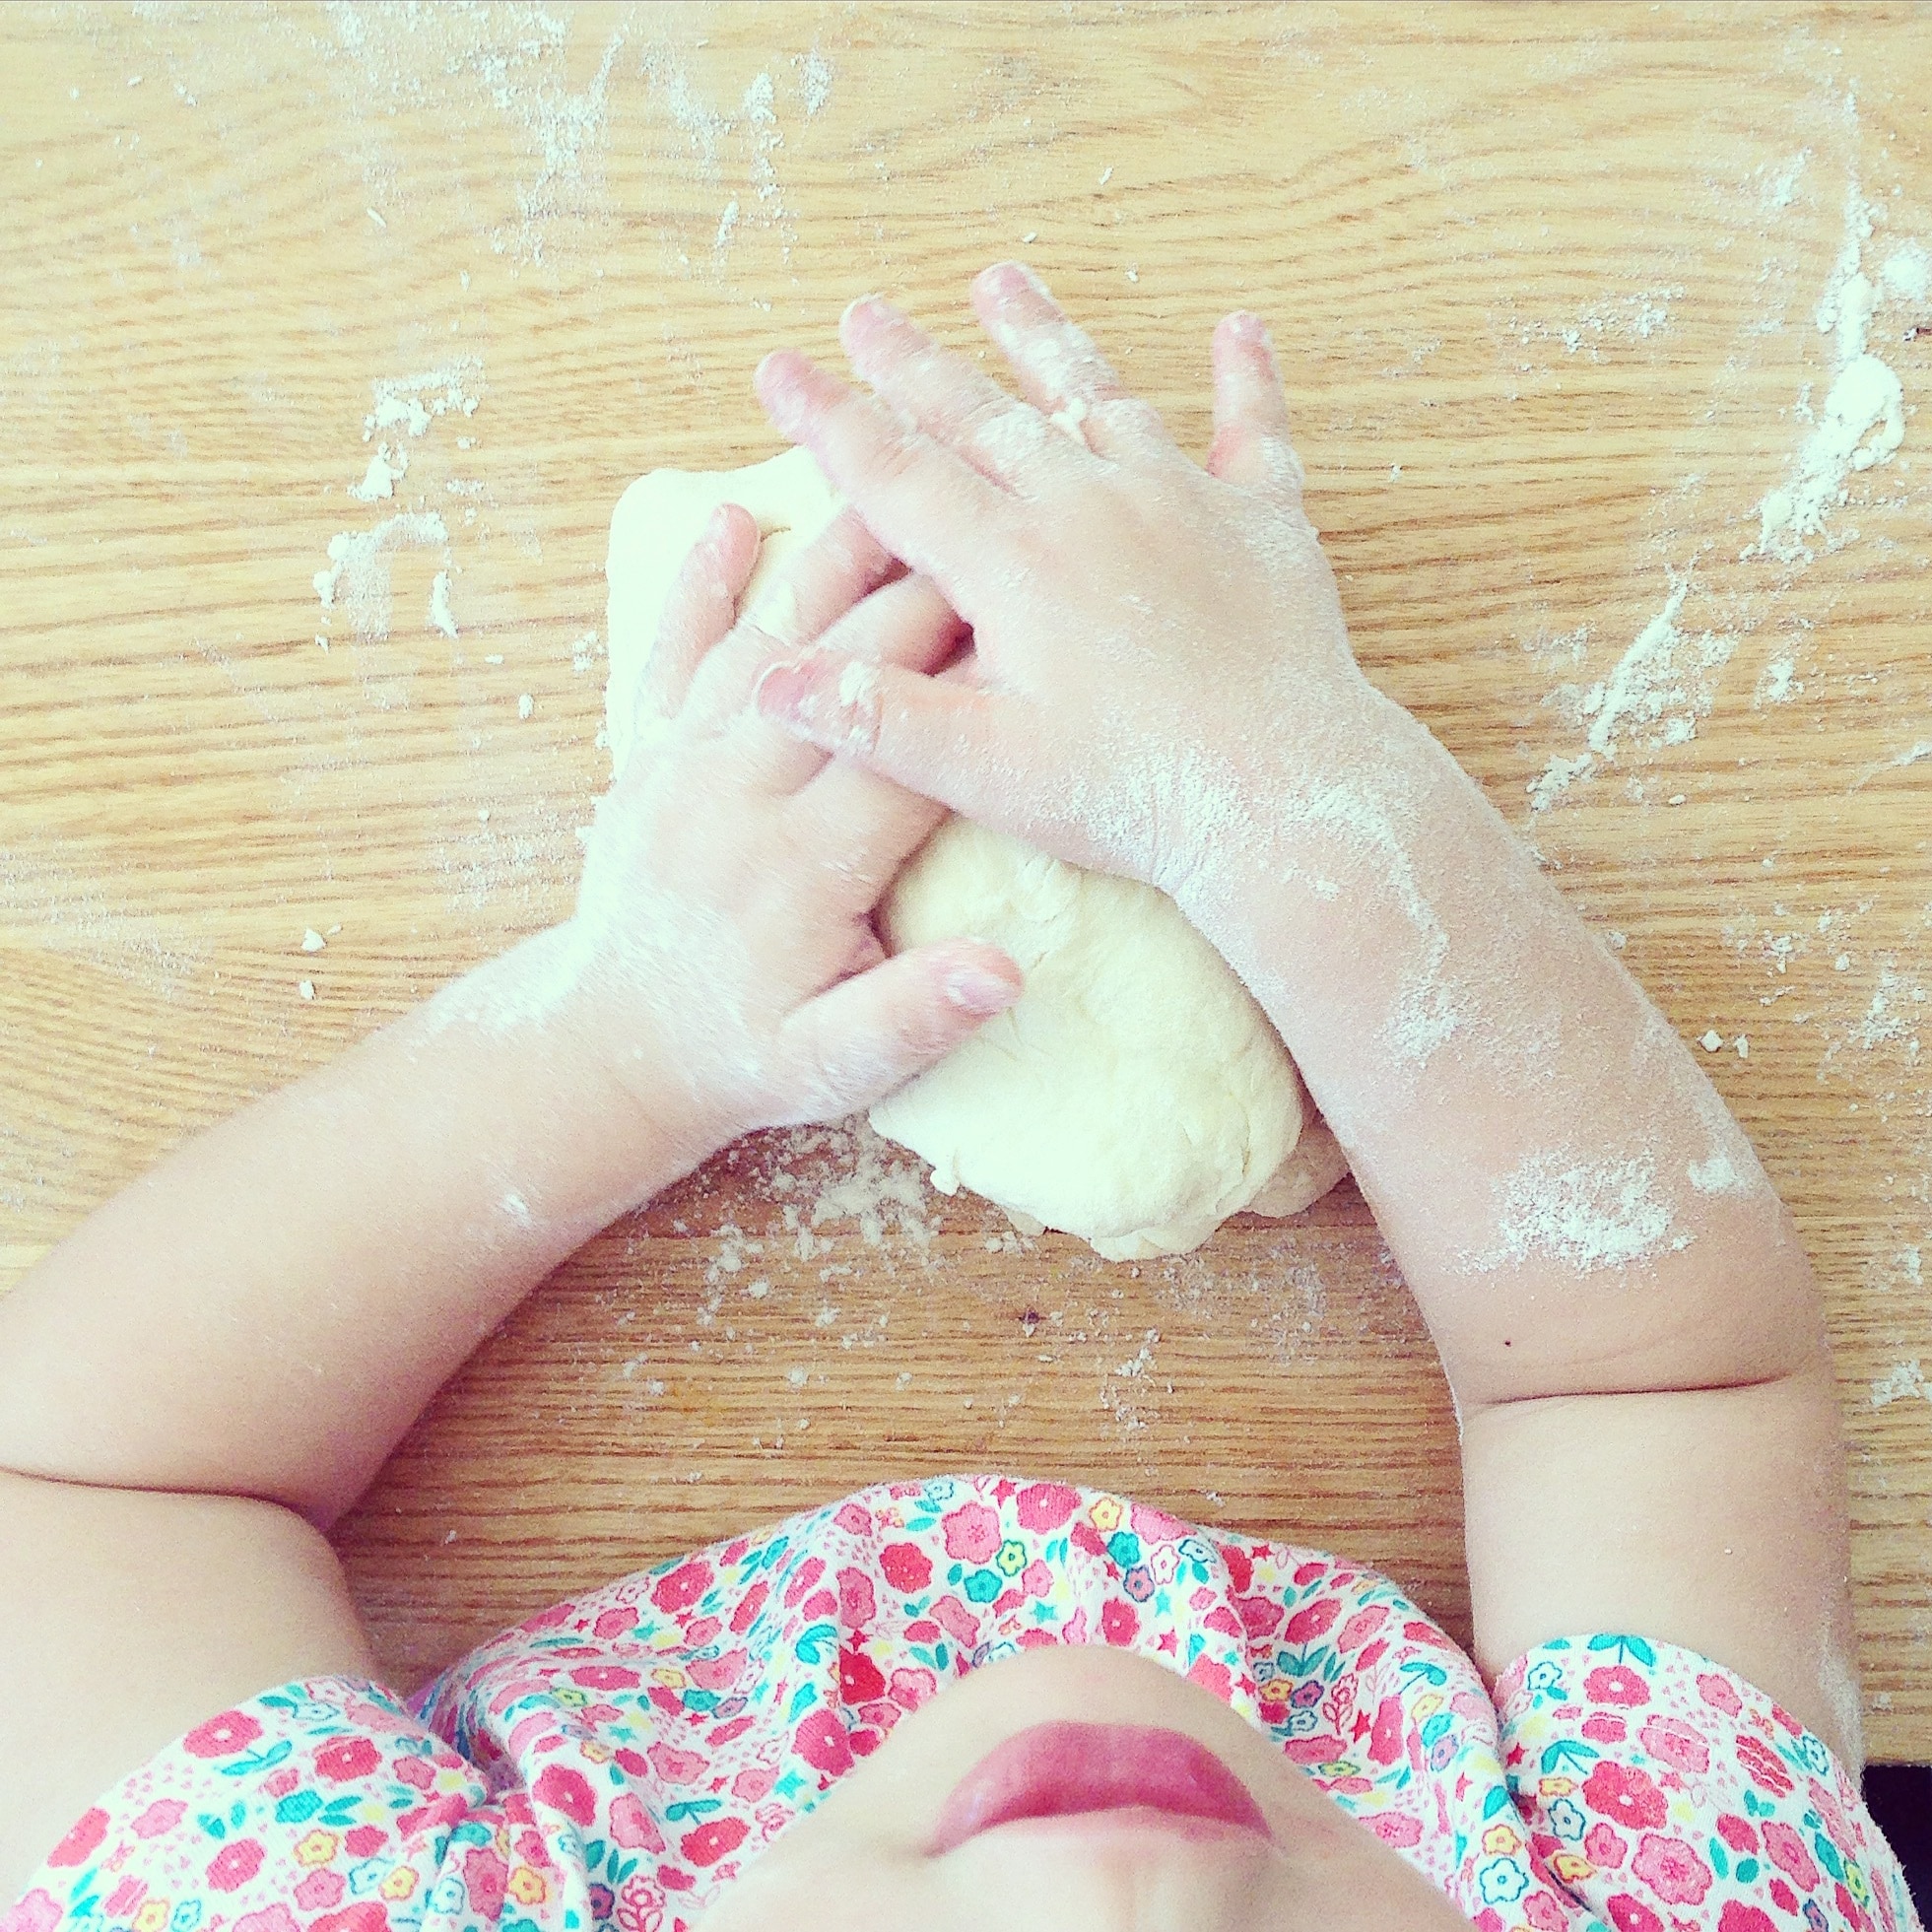 Flour, Hand, Child, Kitchen, Table, one person, indoors